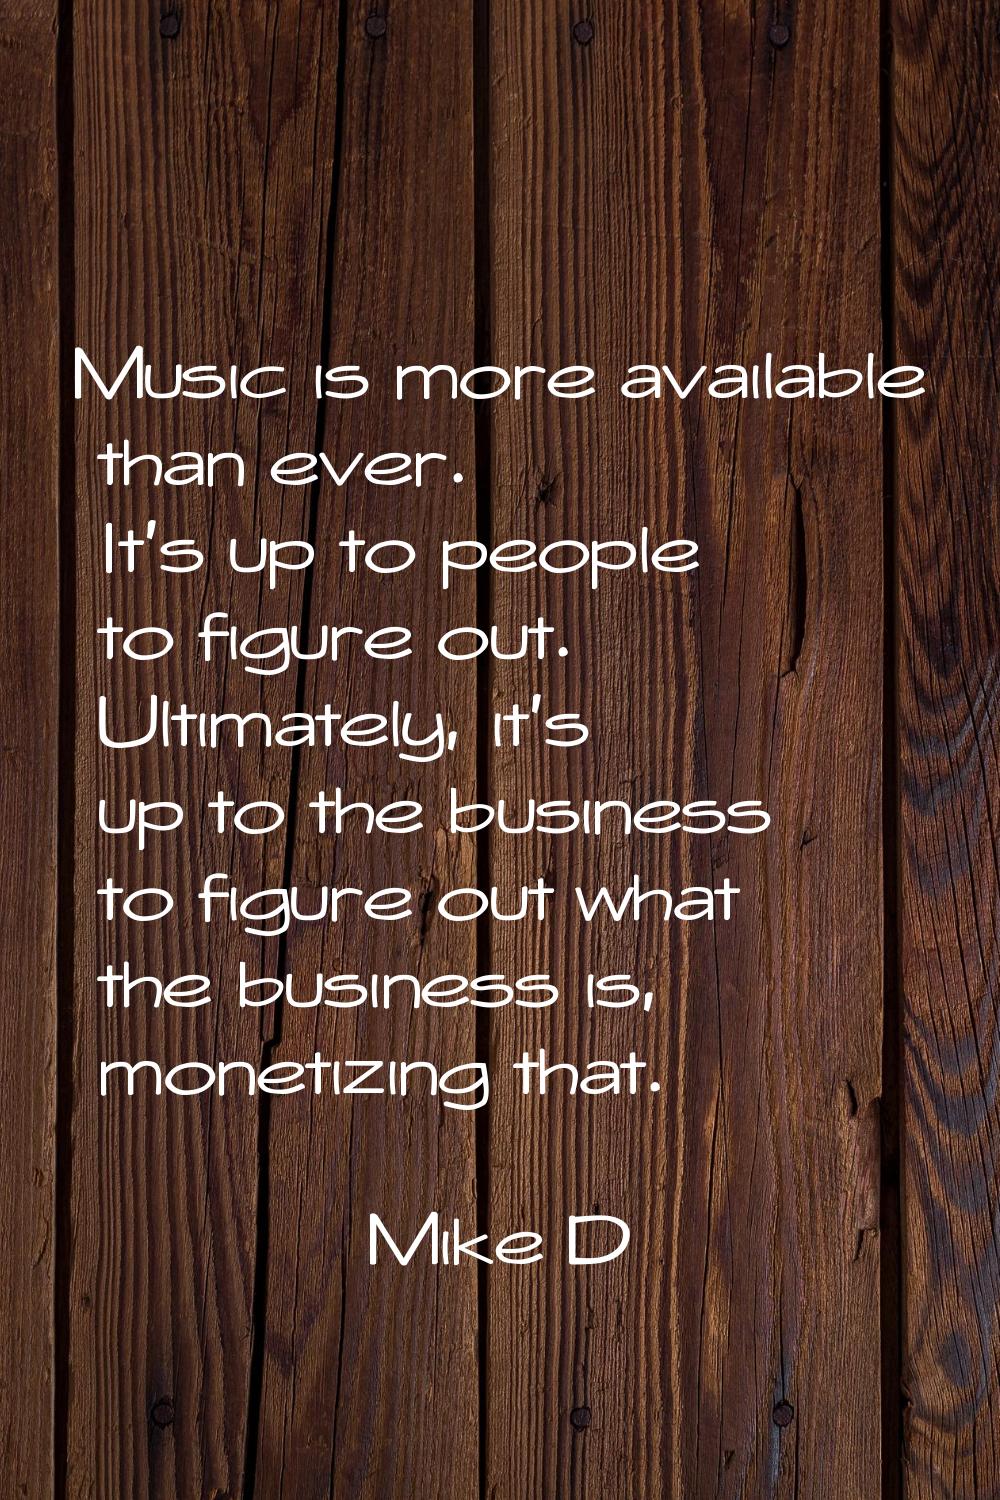 Music is more available than ever. It's up to people to figure out. Ultimately, it's up to the busi